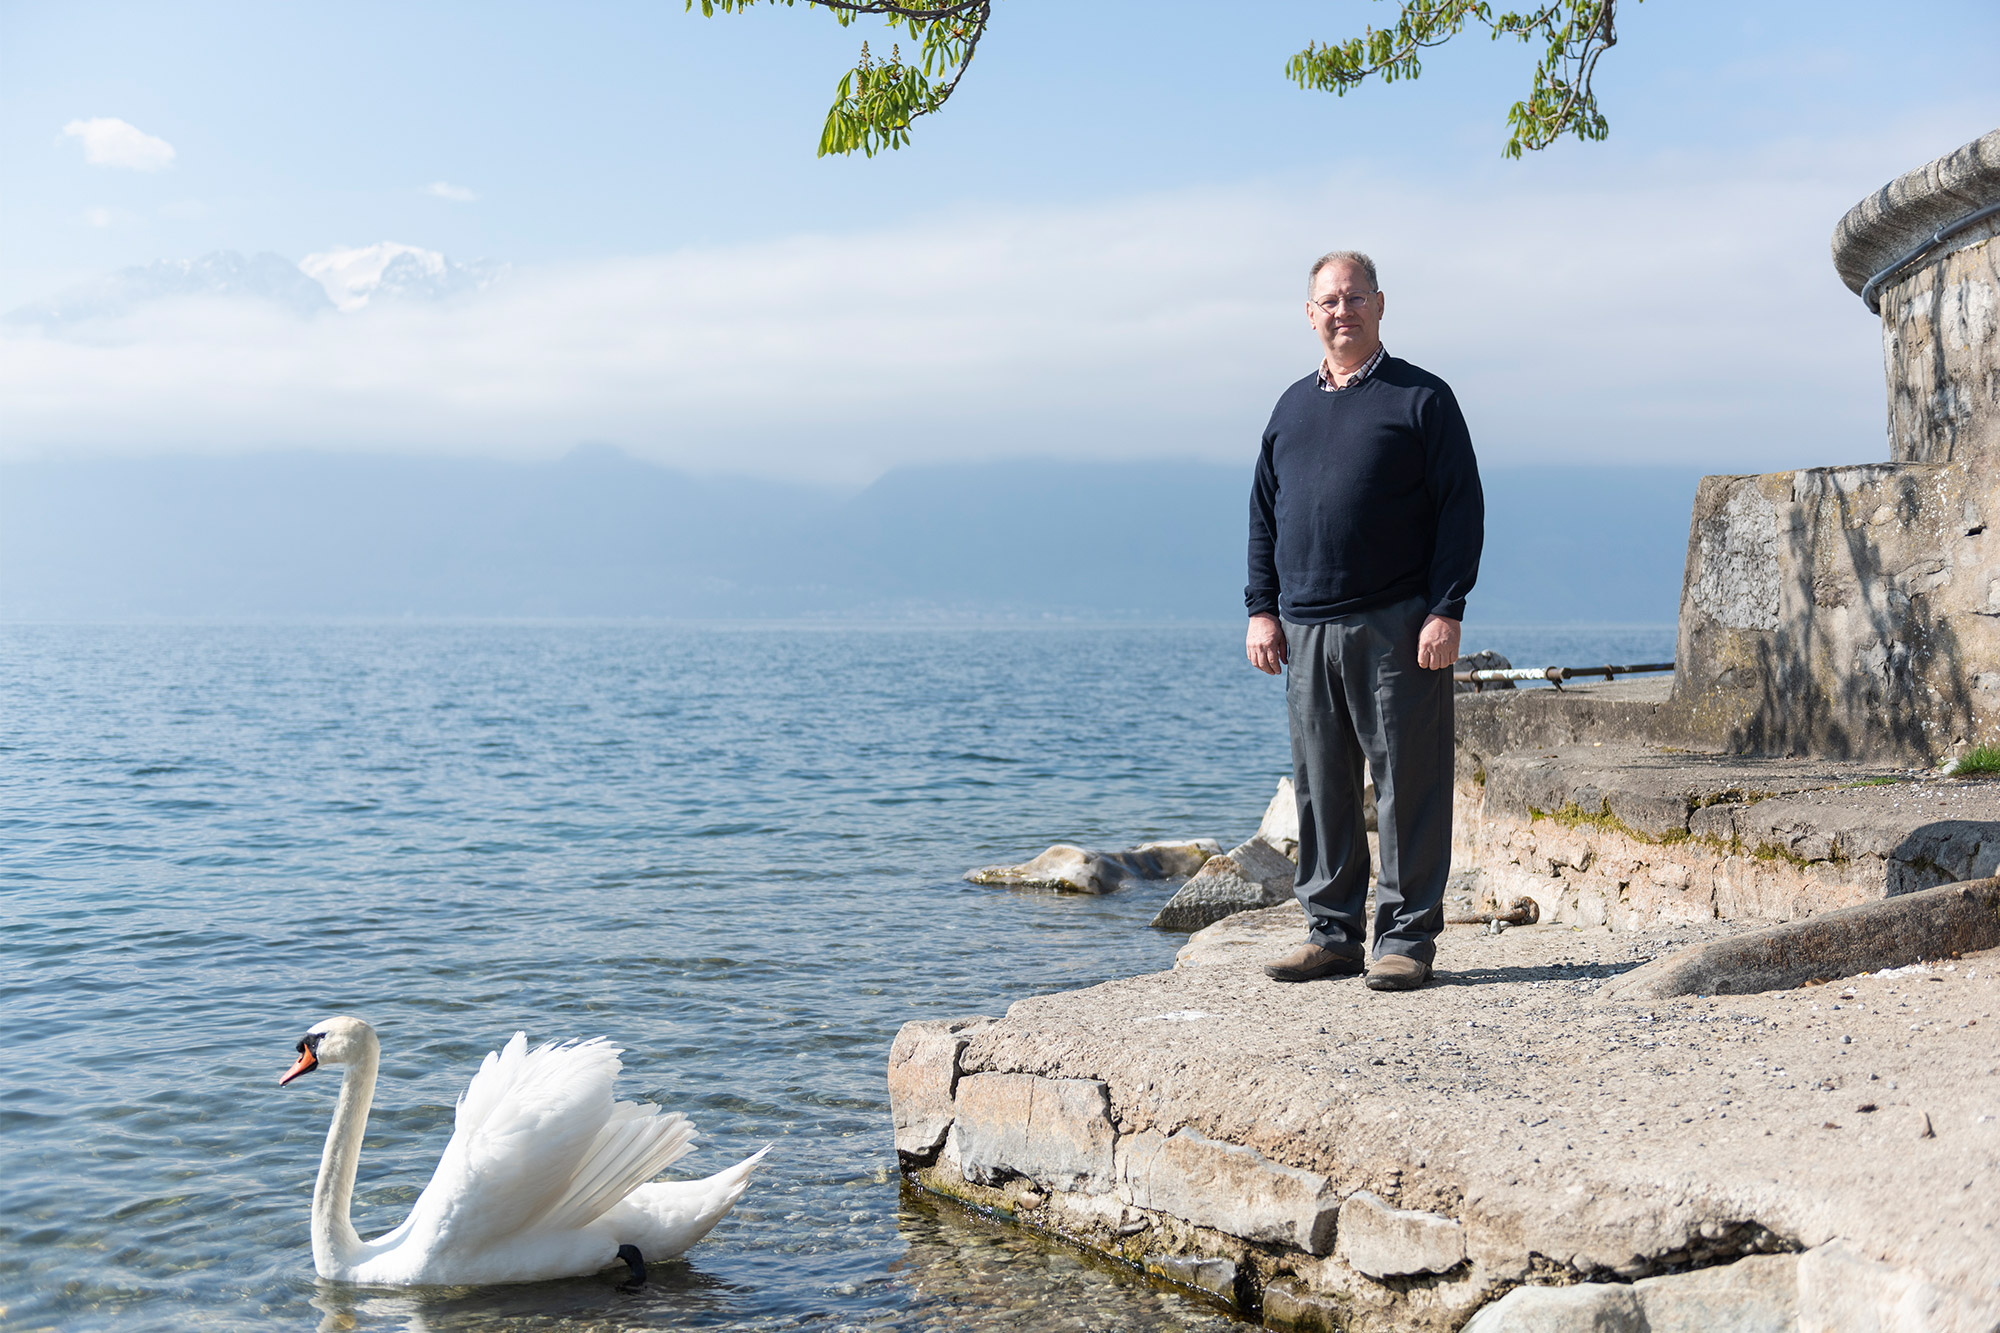 A photo of Jay Comfort standing for a photo by the water as a swan swims nearby.